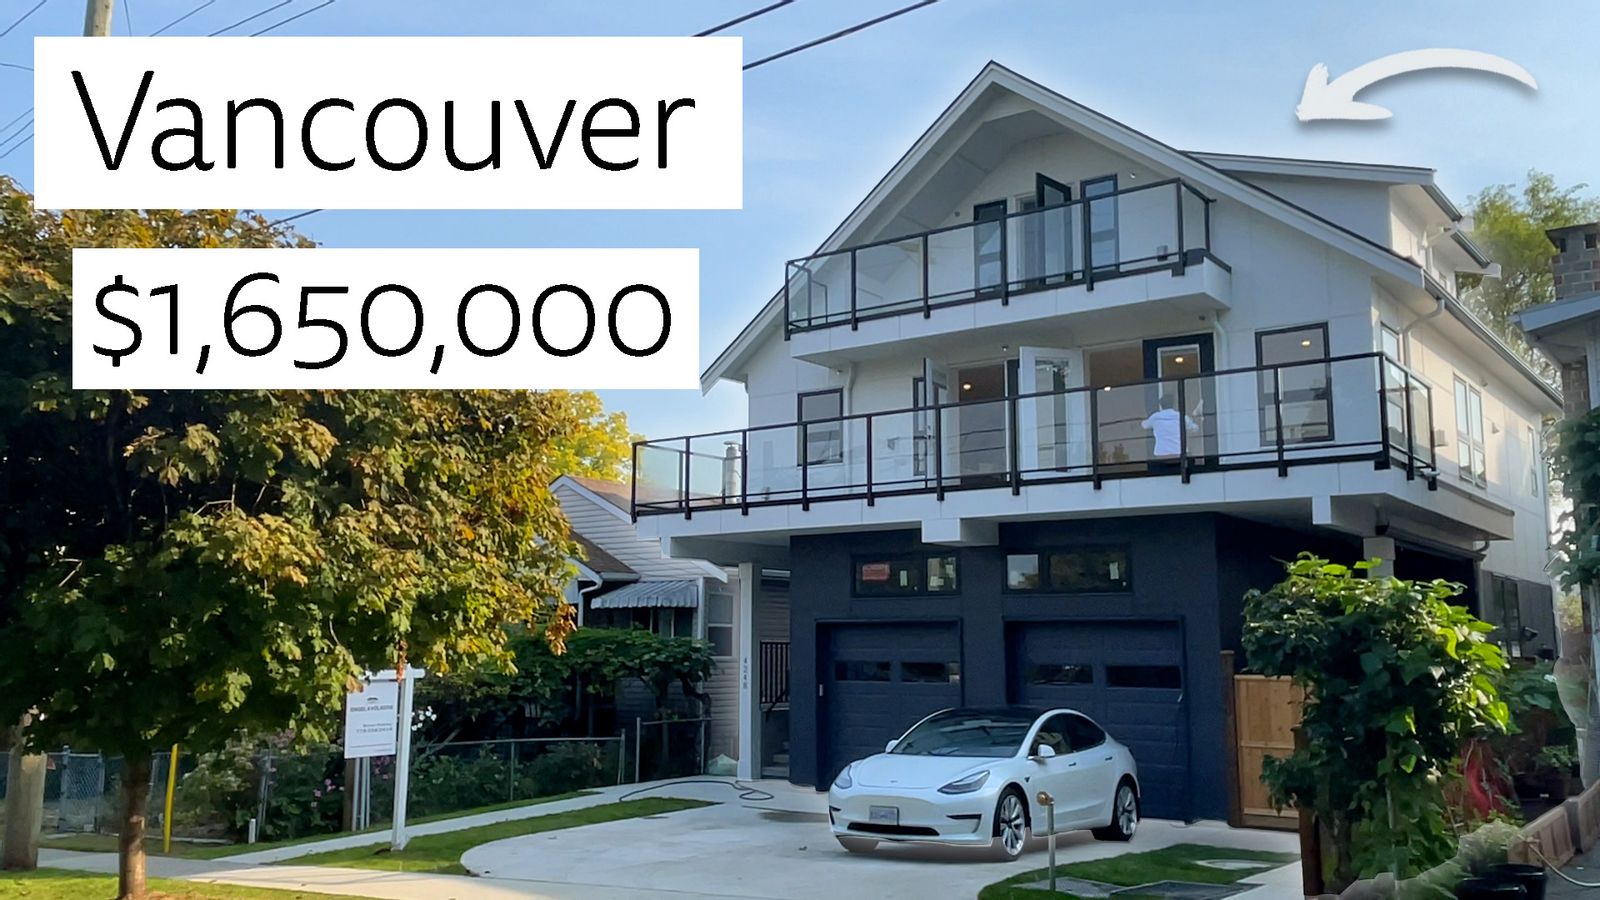 Brand New $1.65 Million Dollar Home Tour in Vancouver